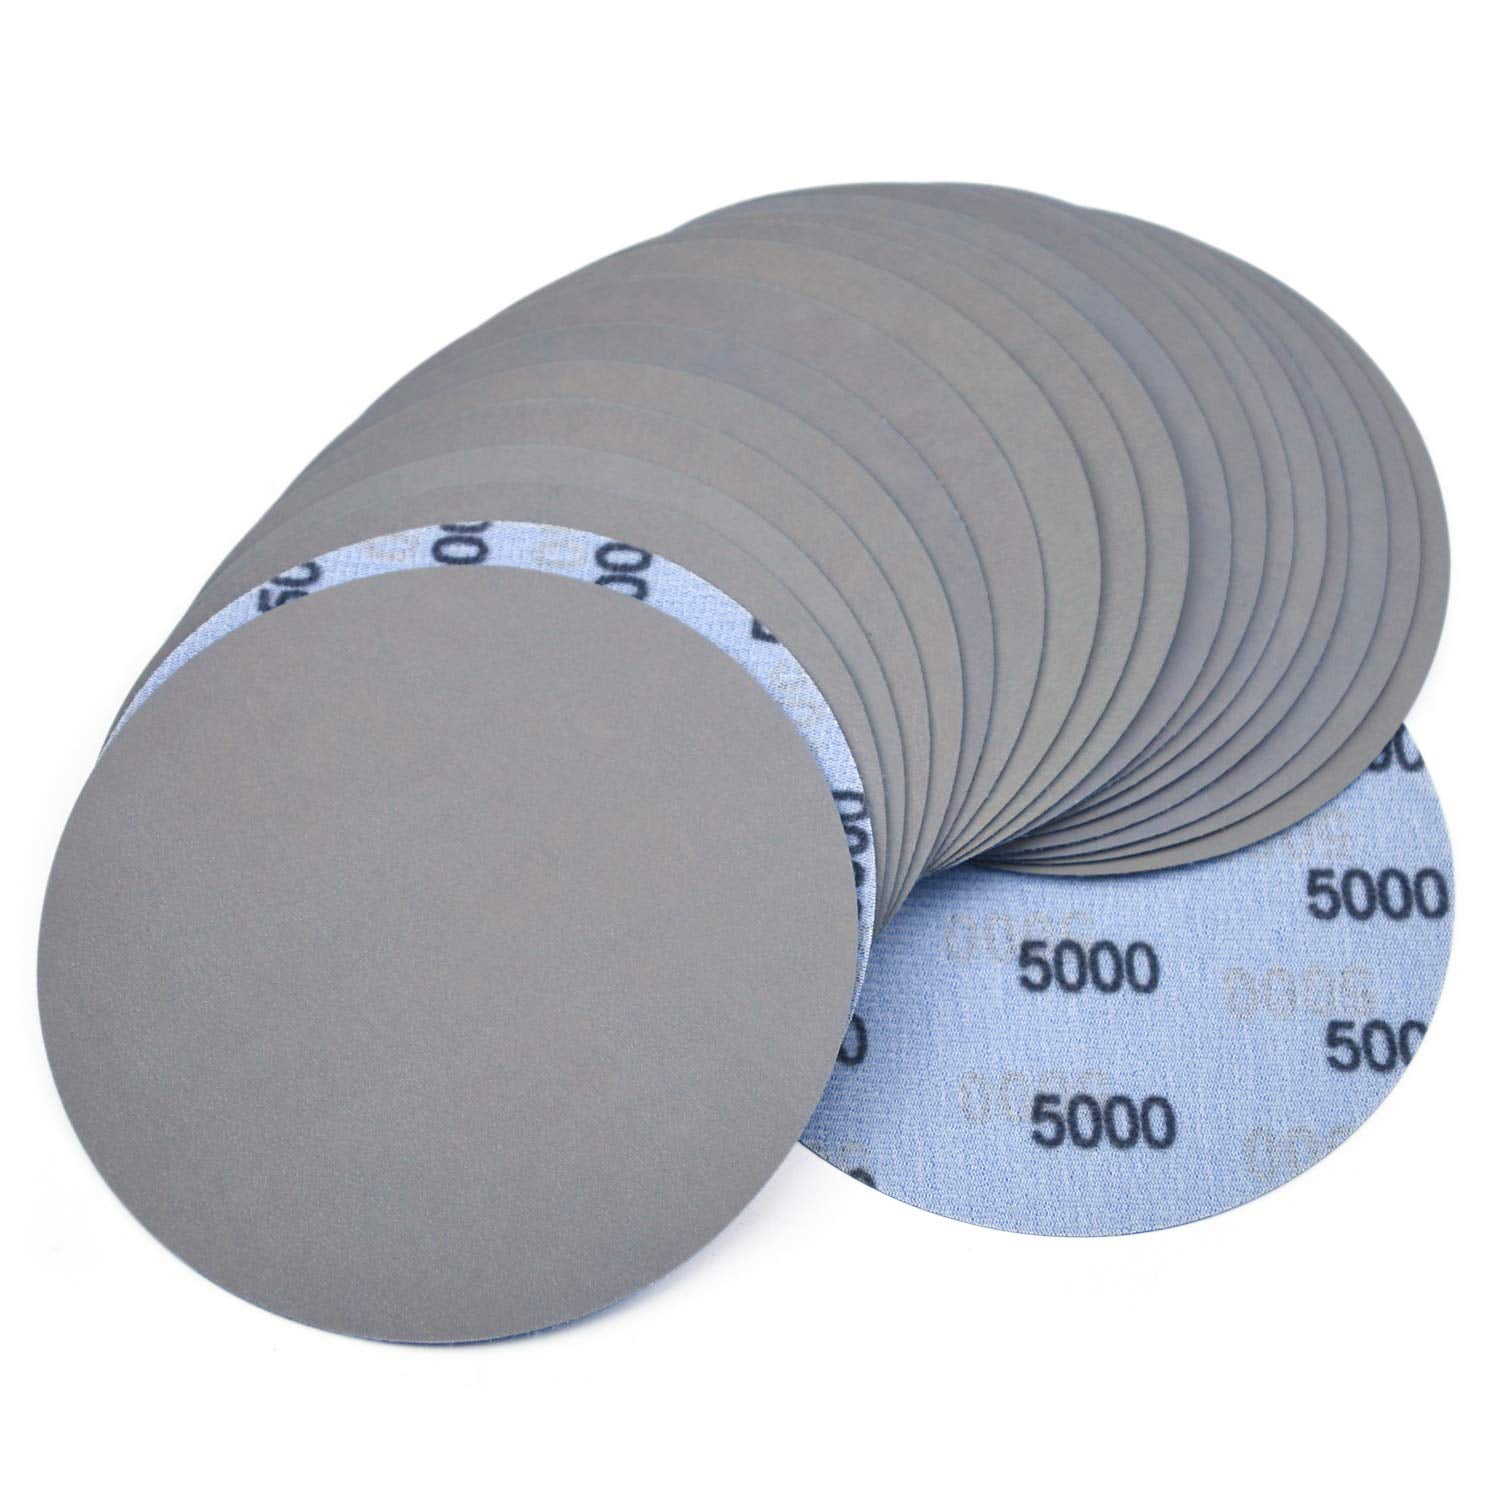 6 Inch 150mm Assorted Grit High Performance Waterproof Hook & Loop Sanding Discs Heavy Duty Silicon Carbide Round Flocking Sandpaper for Wet/Dry Sanding Grinder Polishing Accessories 20-Pack 